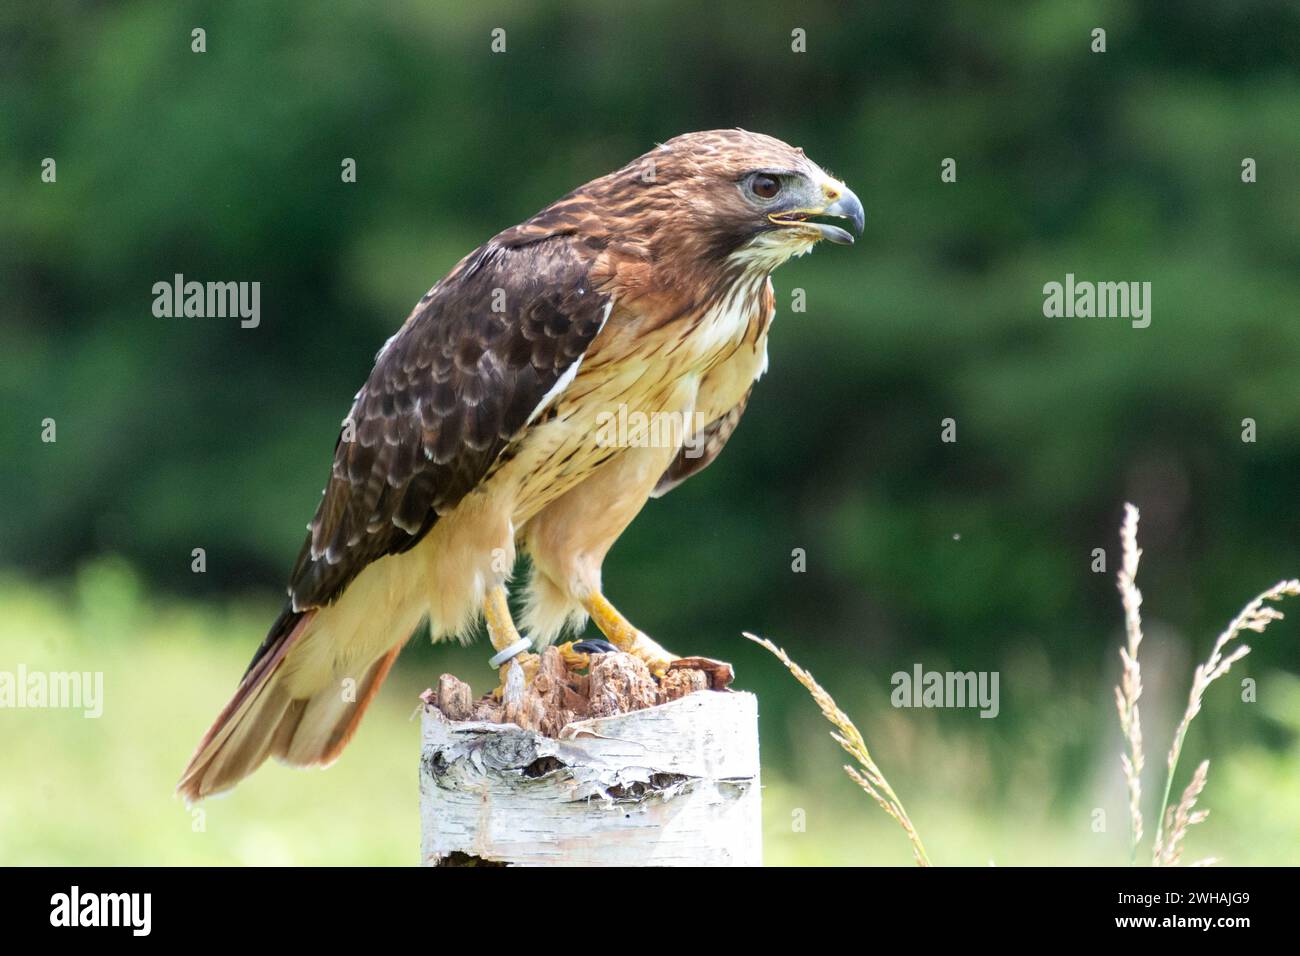 A red-tailed buzzard (Buteo jamaicensis) perched on a post outdoors in daytime Stock Photo